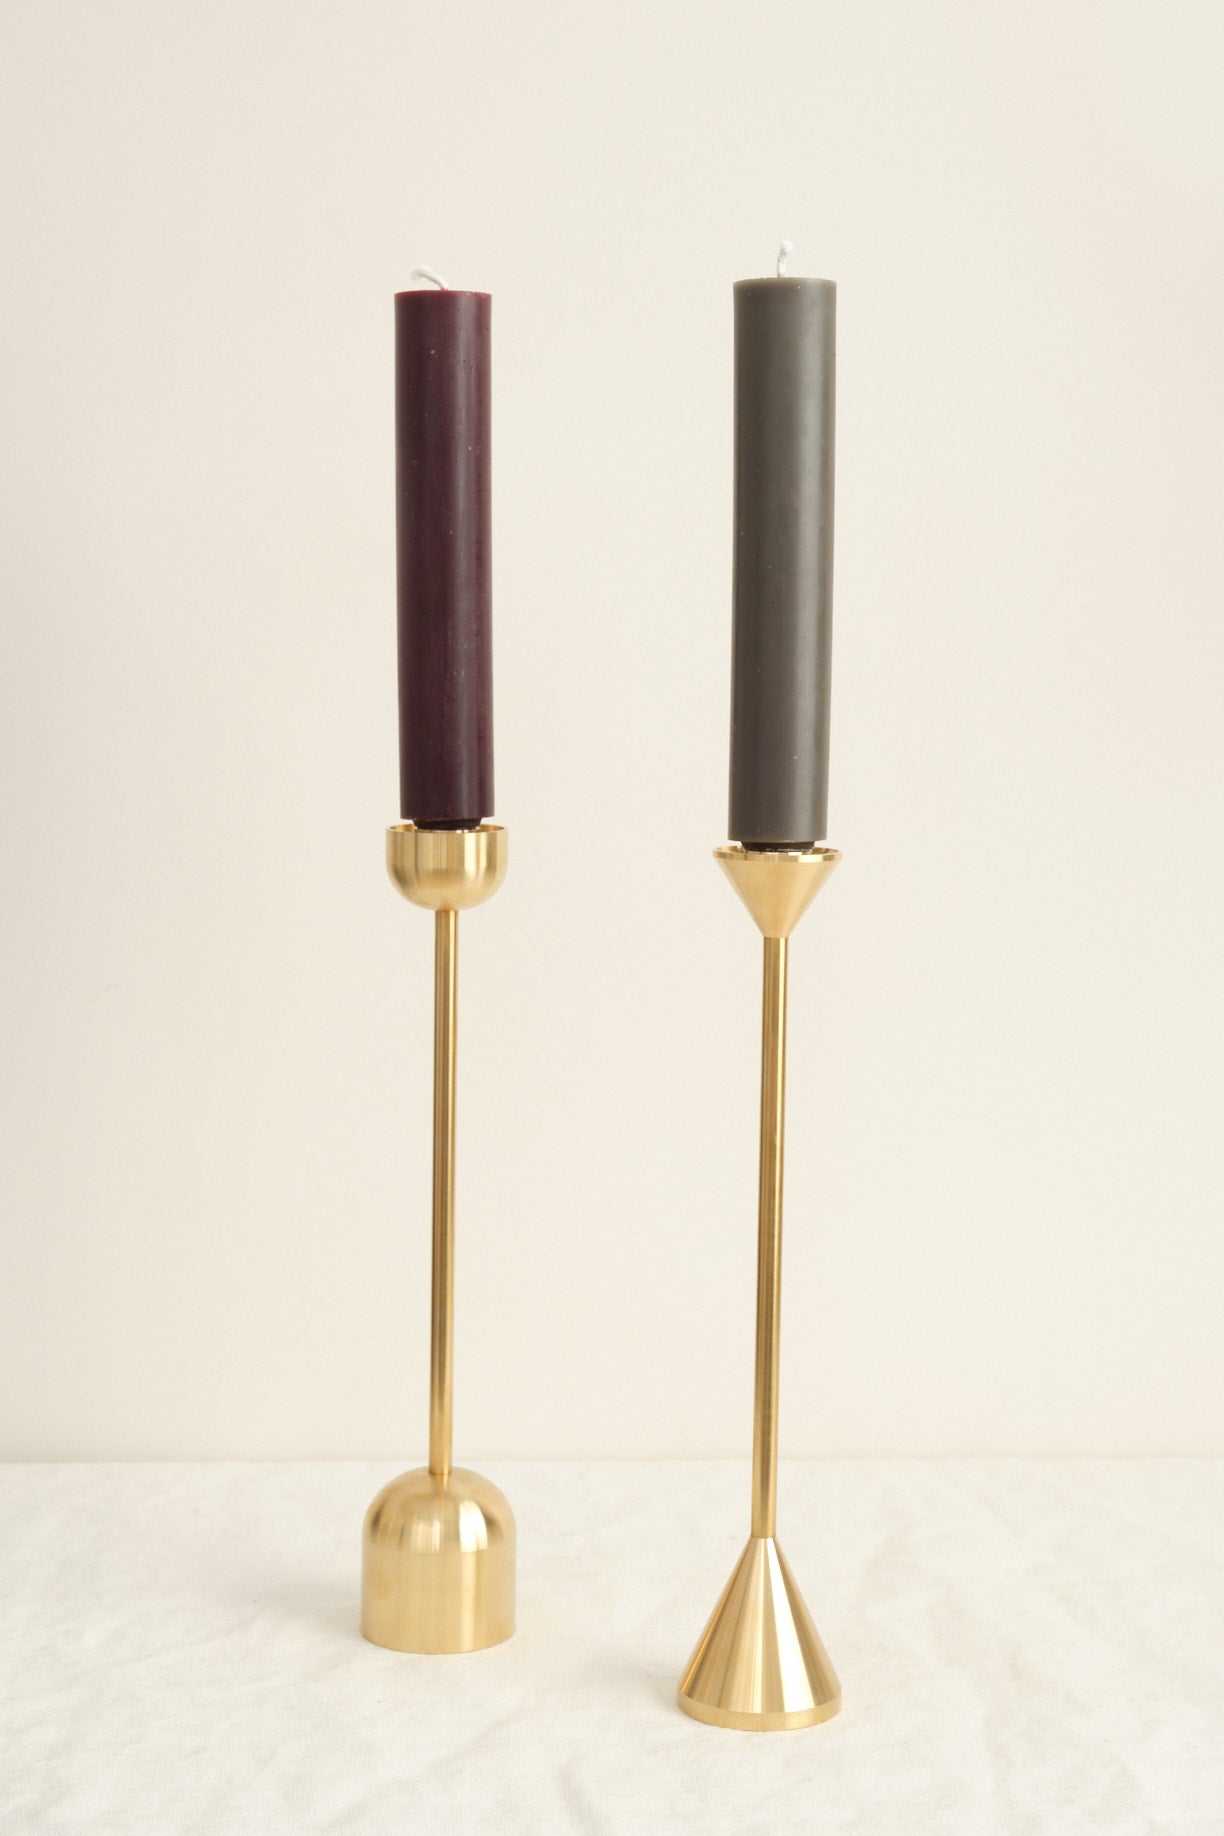 Fort Standard tall candle holders